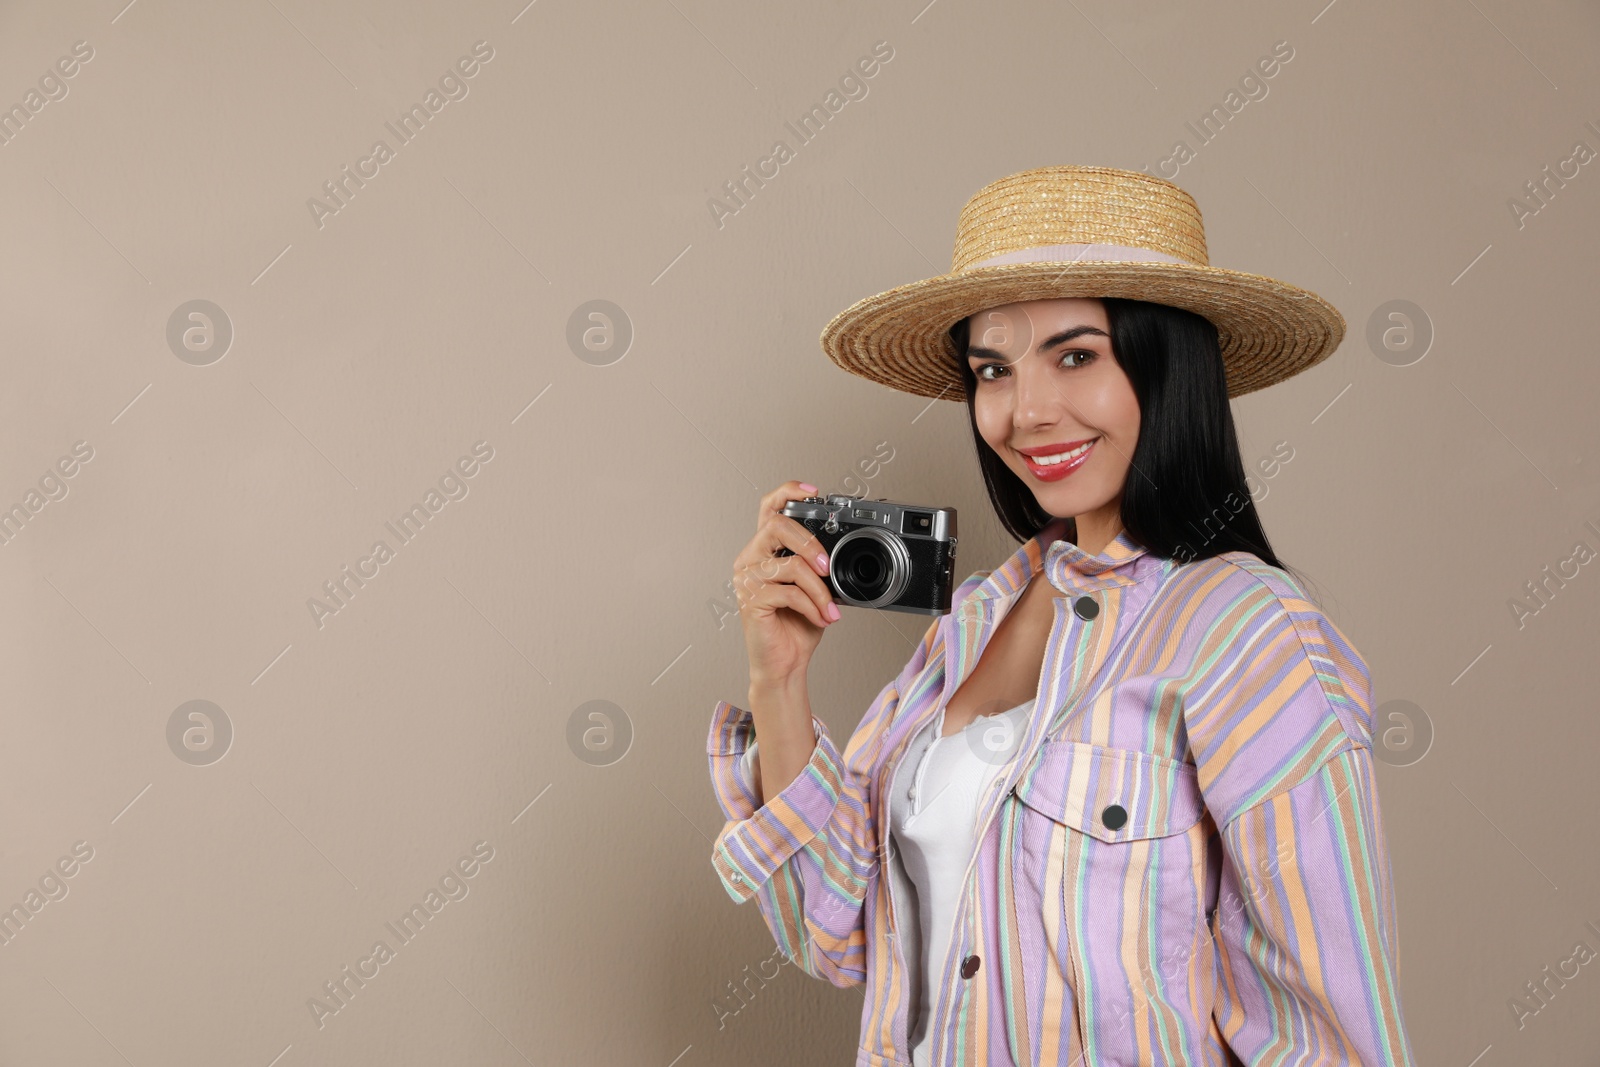 Photo of Beautiful young woman with straw hat and camera on beige background. Space for text